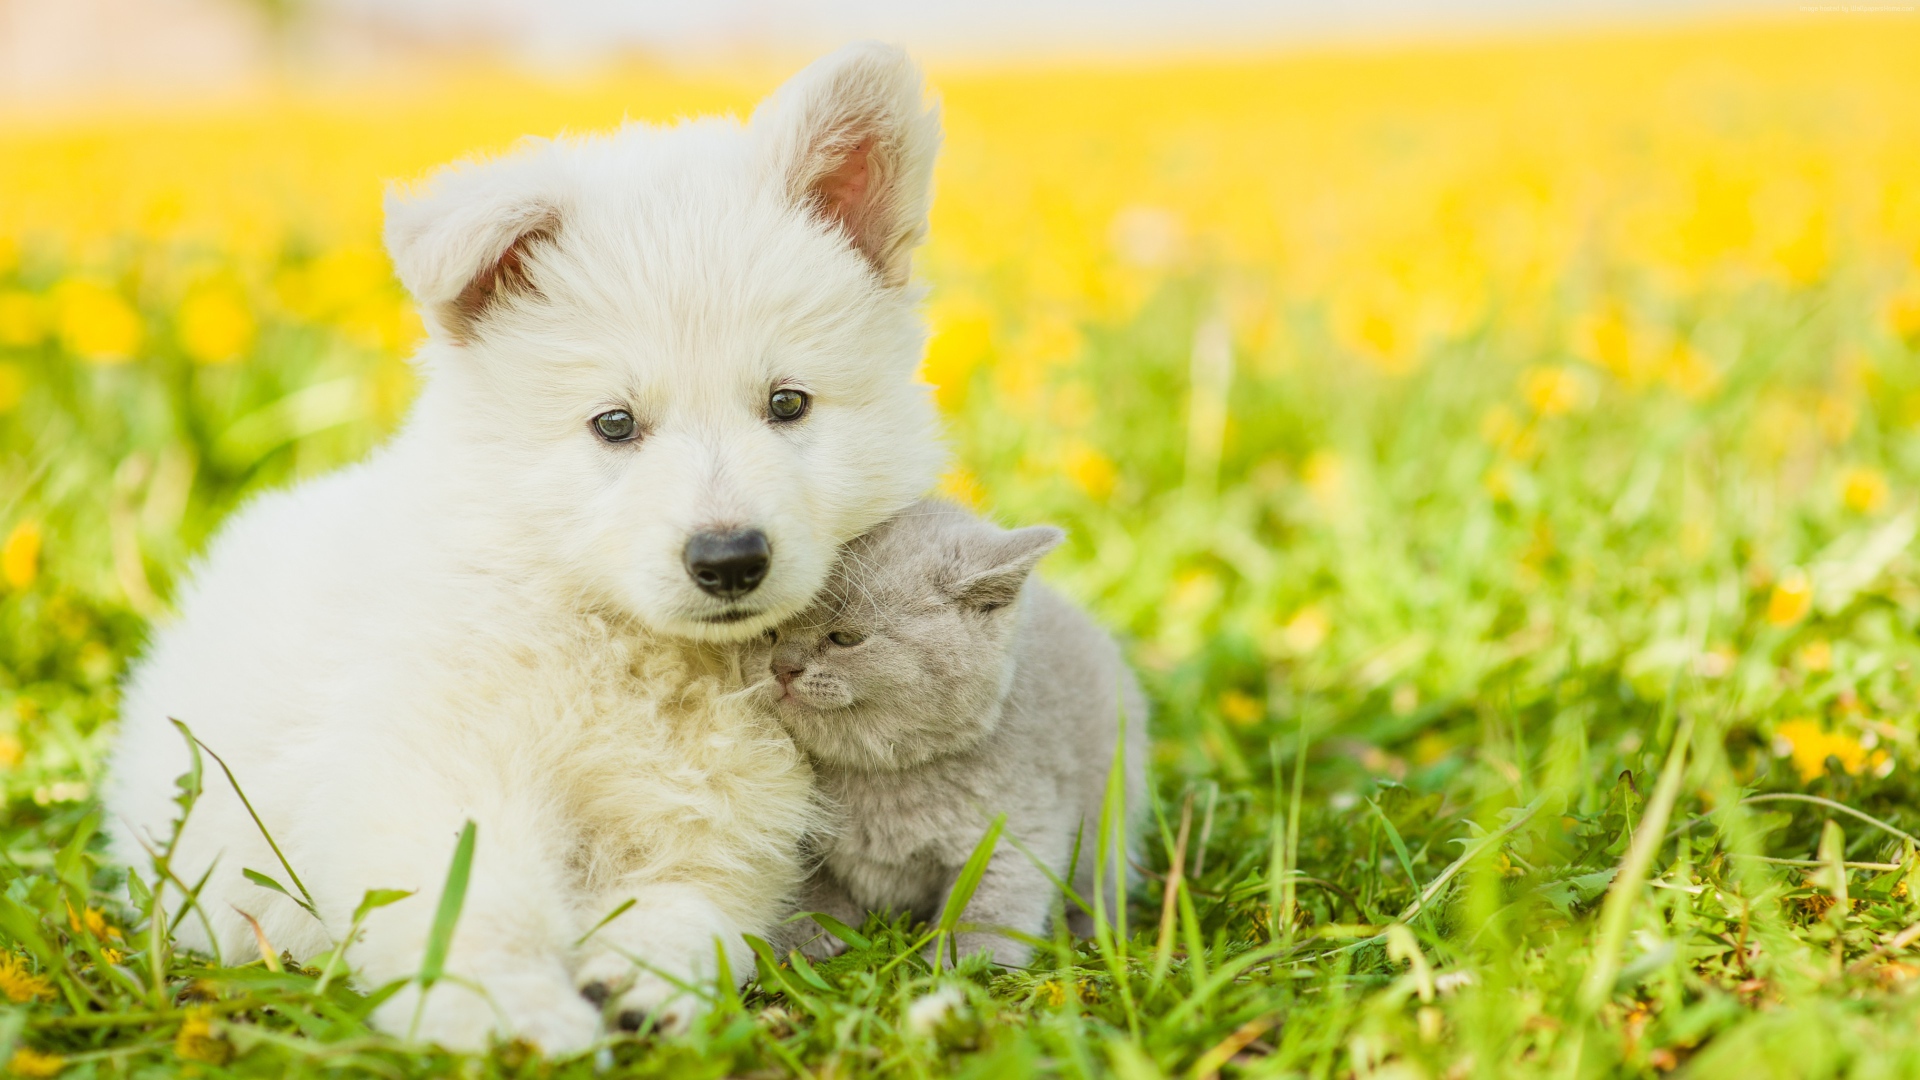 Fluffy white puppy with gray kitten sitting on the grass